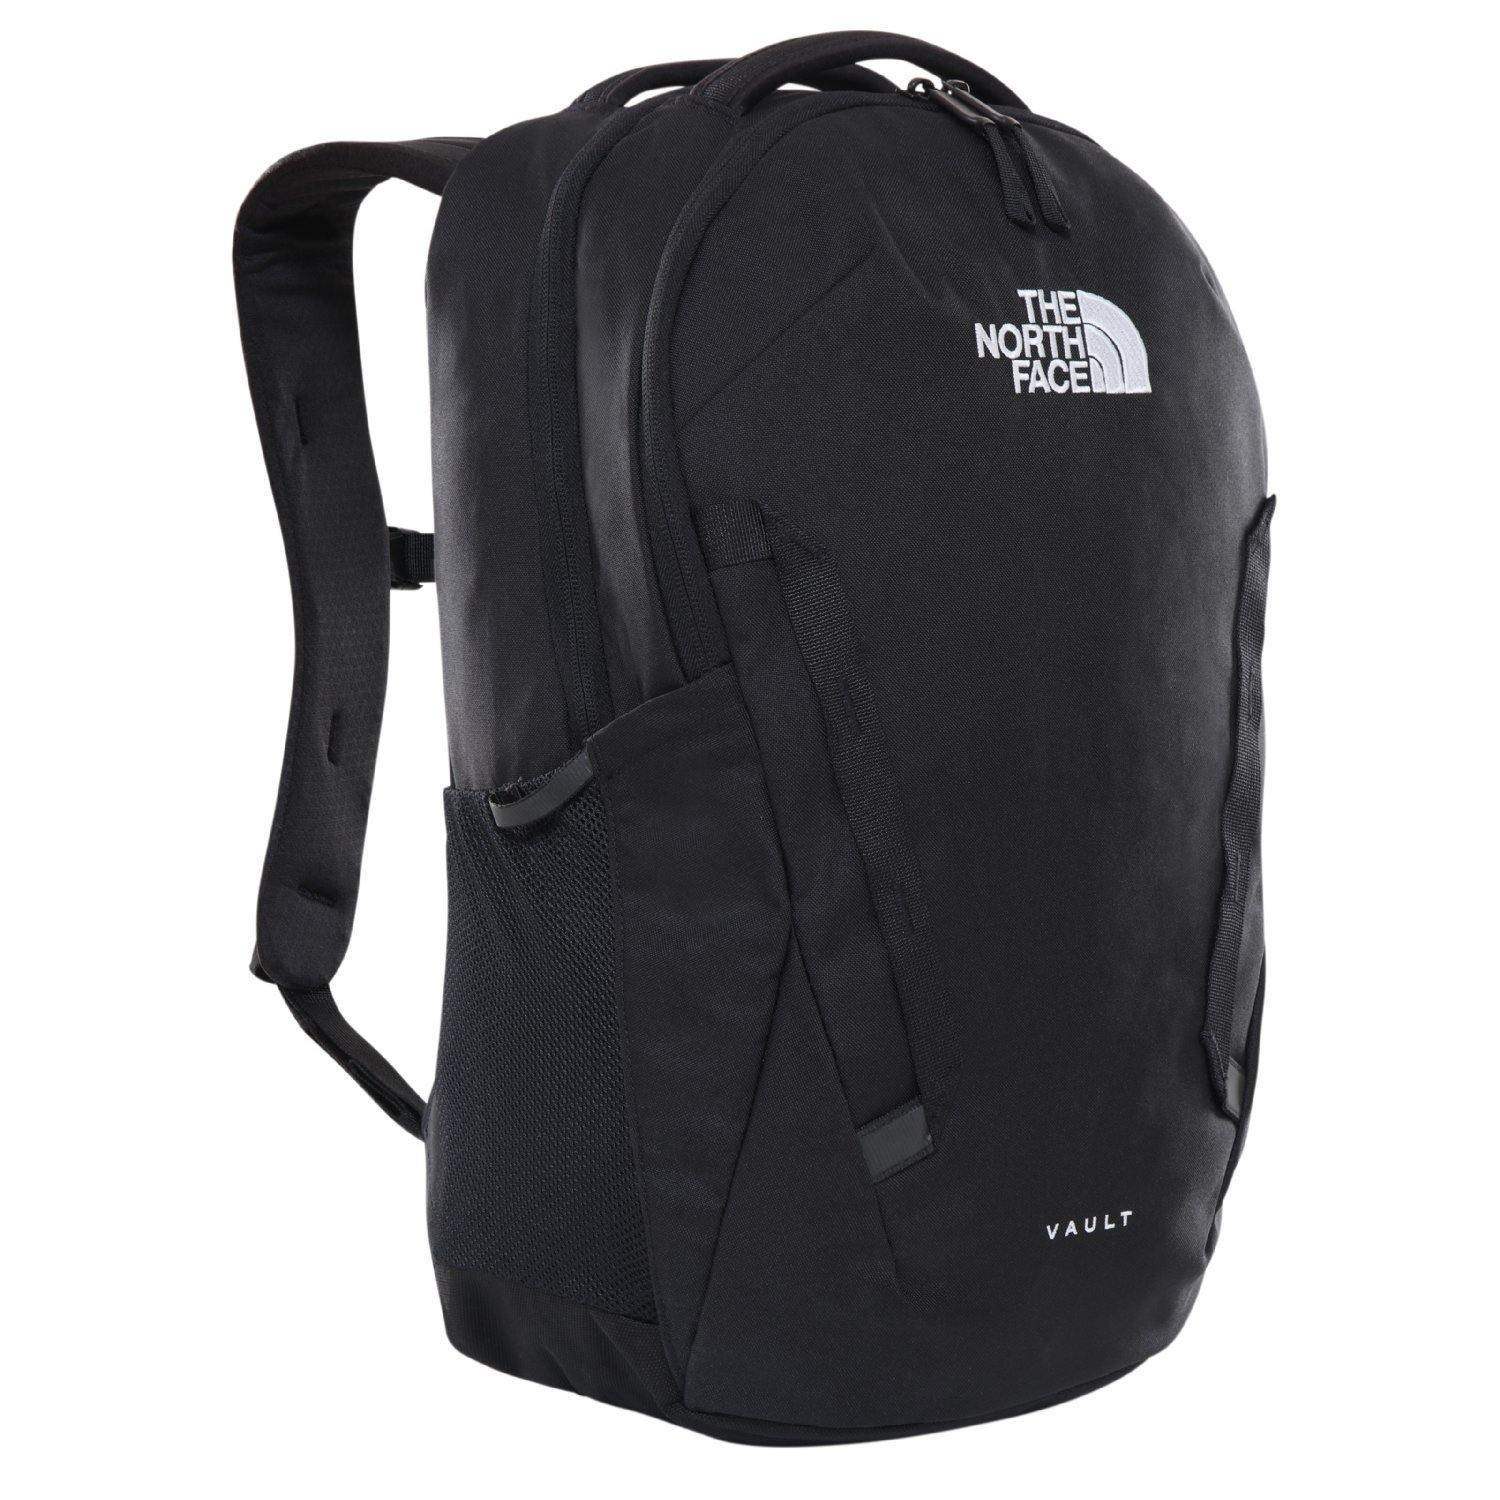 Vault by The North Face - The Luxury Promotional Gifts Company Limited